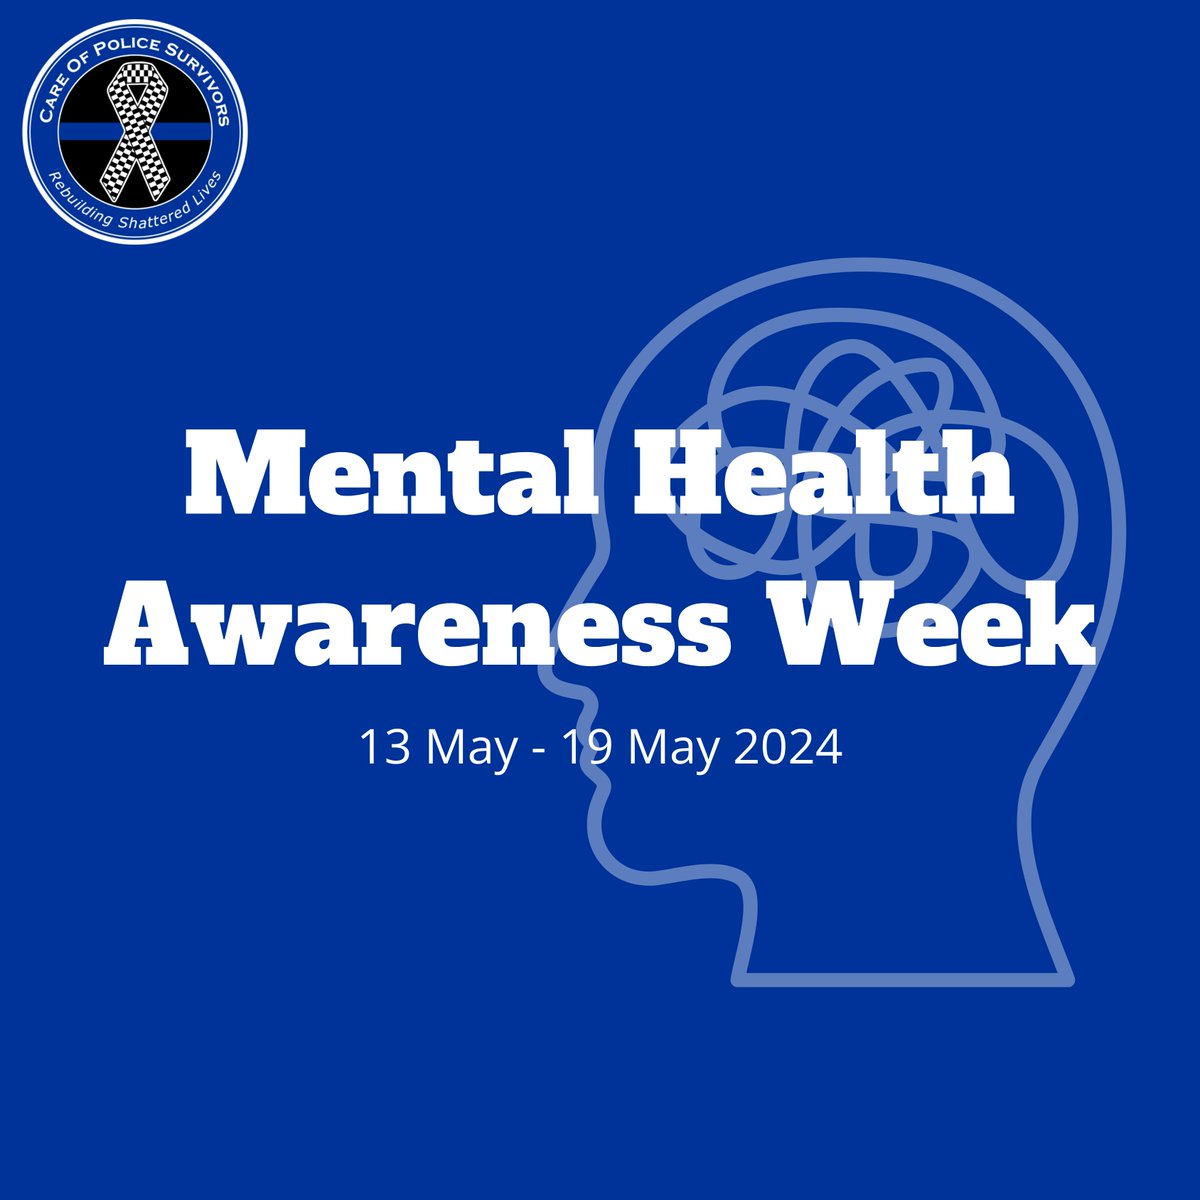 This week COPS will be taking part in Mental Health Awareness Week. Over the next few days we will be sharing how we support the mental wellbeing of our Survivors.

 #MentalHealthAwarenessWeek #PeerSupport #PoliceFamilies #MentalWellbeing #CharitySupport